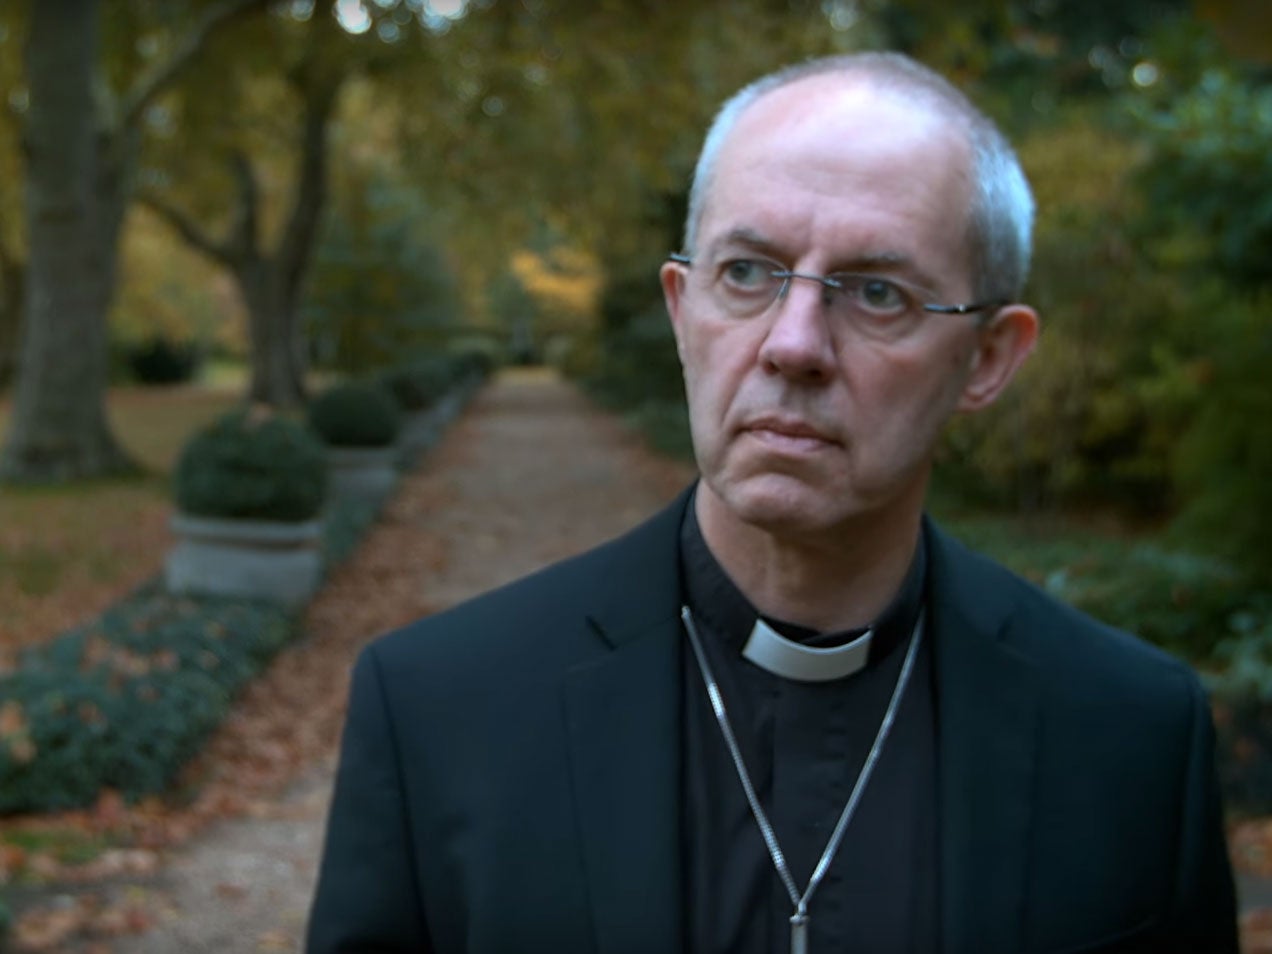 Archbishop of Canterbury Justin Welby in the Just Pray advert